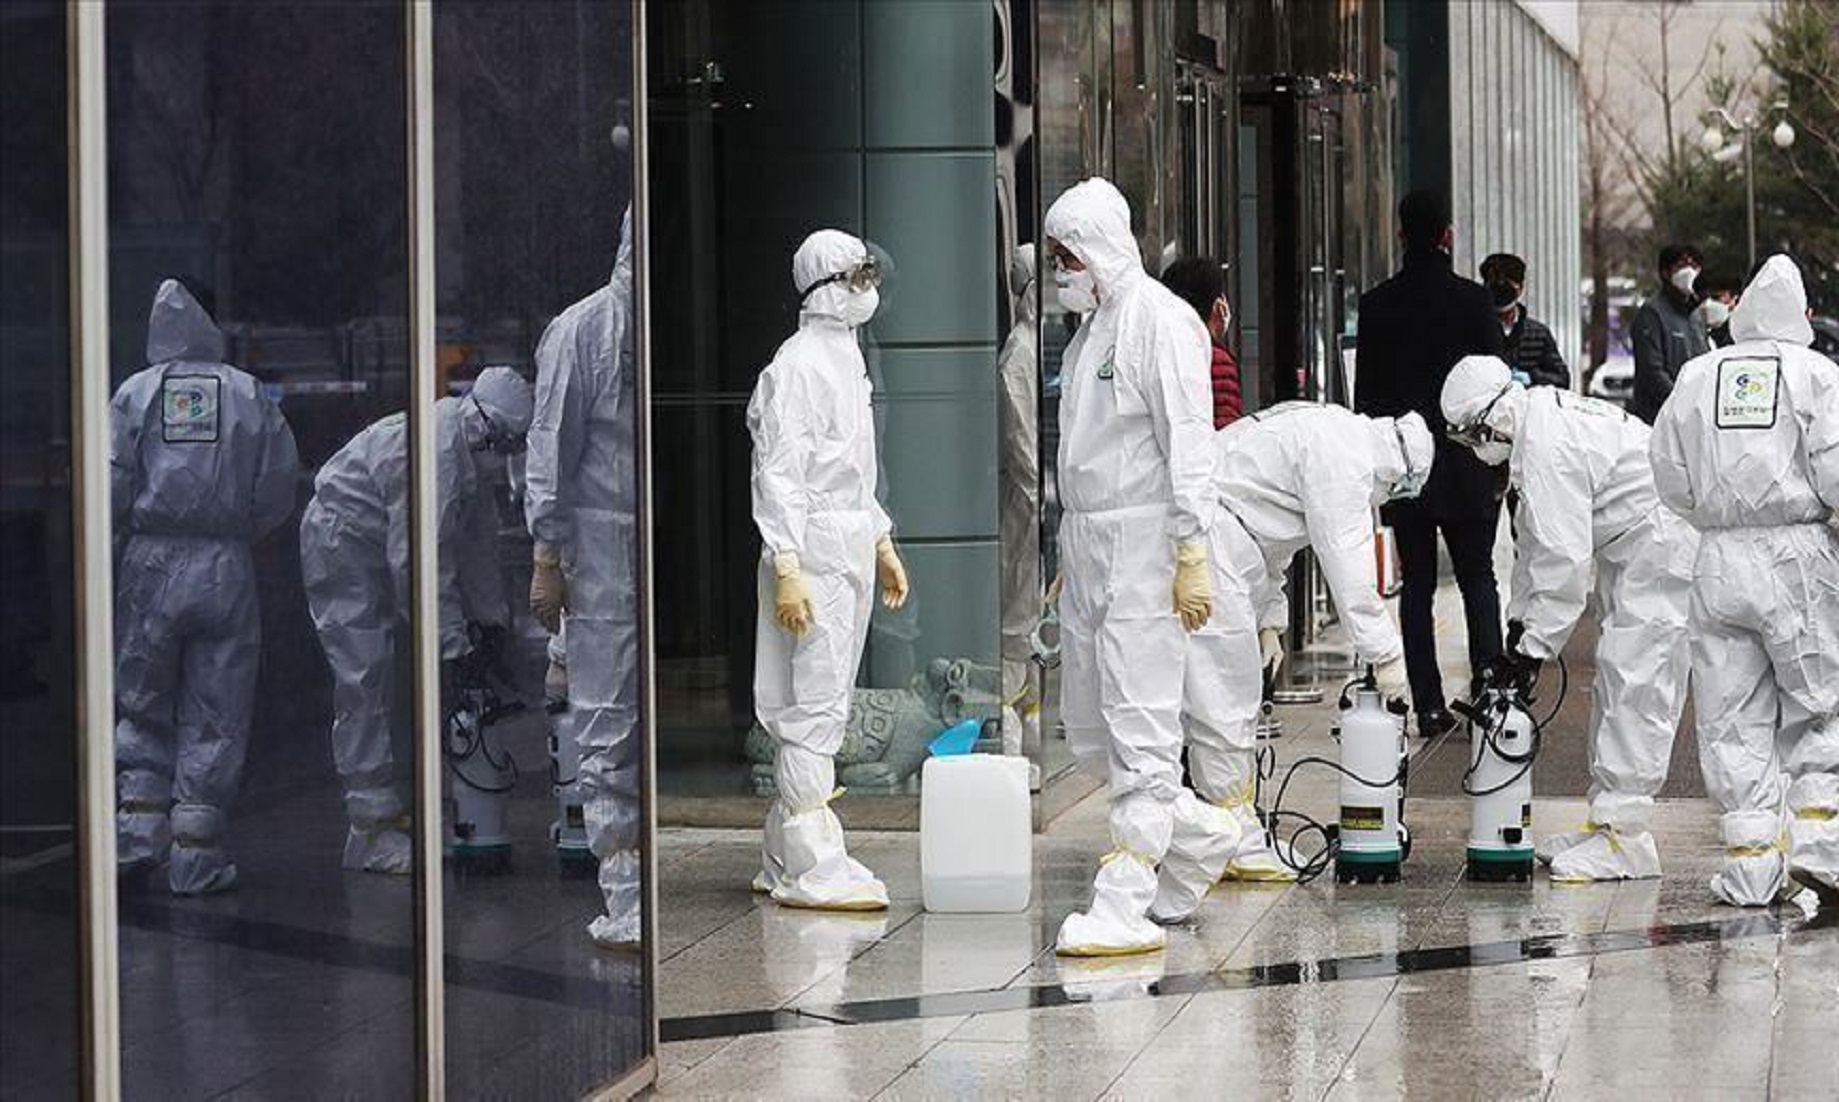 New COVID-19 Cases In Tokyo Top 50 For 5th Straight Day, Concerns Mount Over Virus’ Resurgence